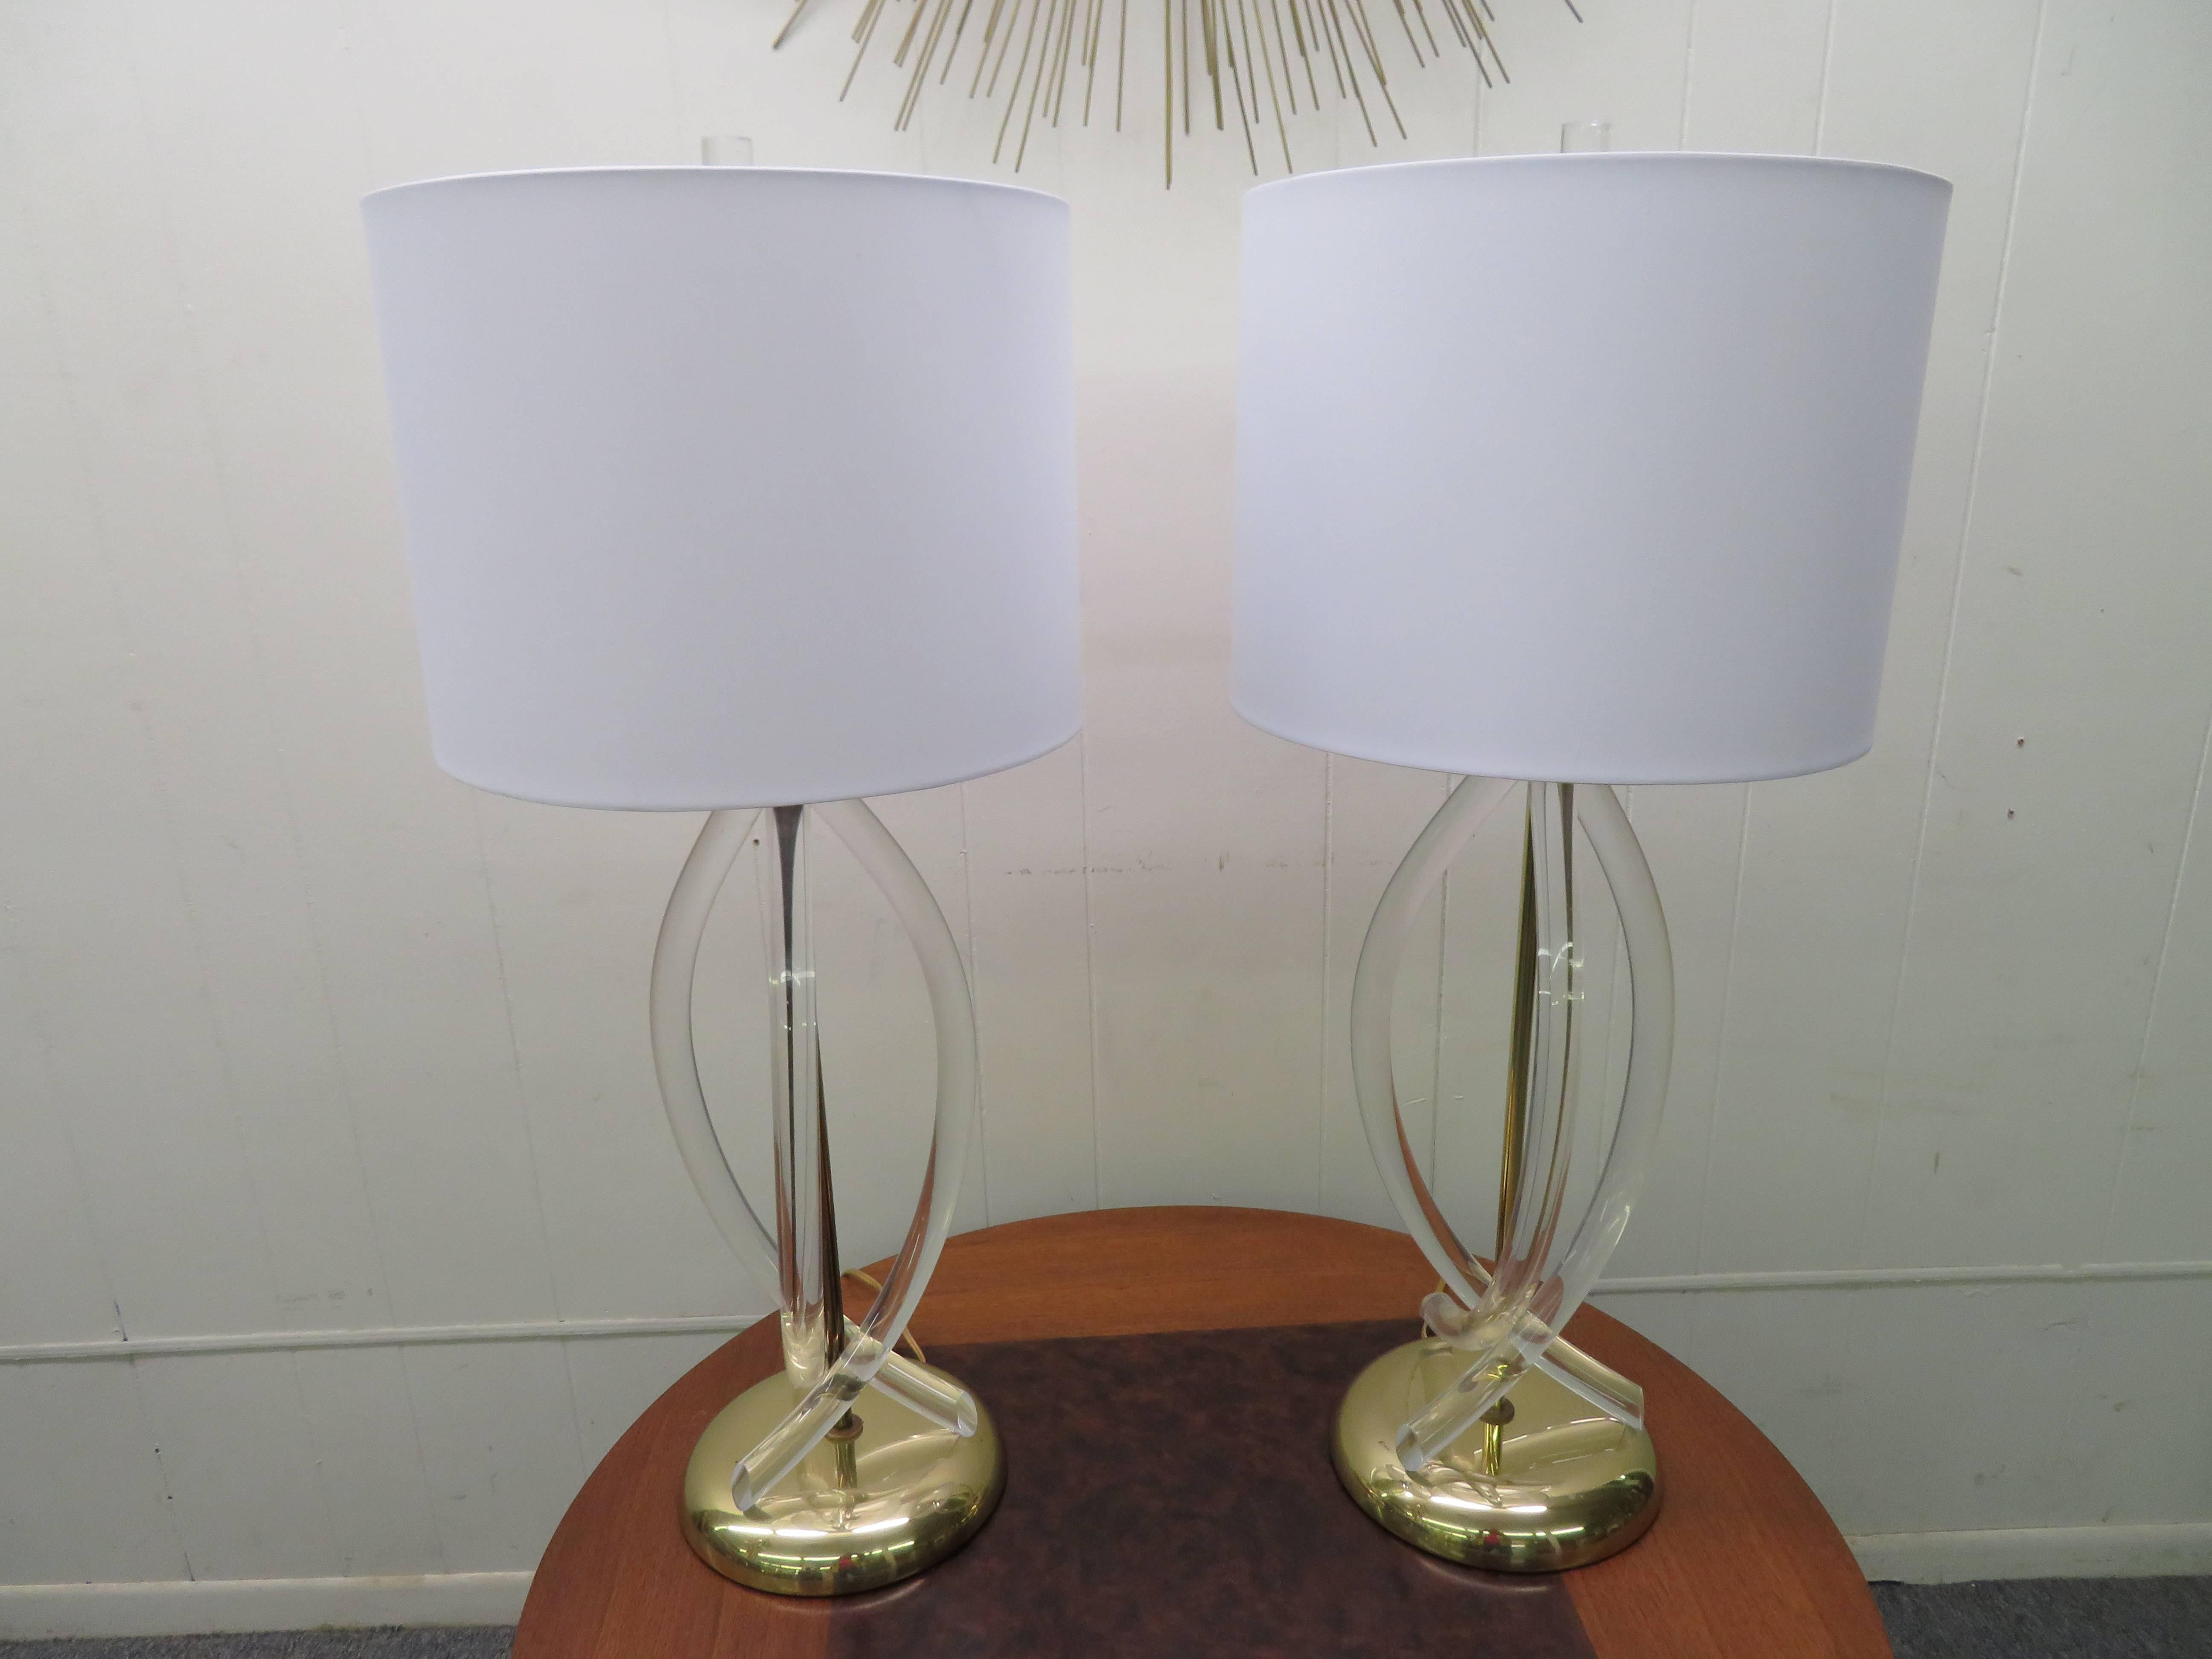 Stunning pair of Dorothy Thorpe Lucite and brass ribbon lamps. Gorgeous vintage condition, the Lucite is clear and the brass has a mellow patina. These lamps measure 33